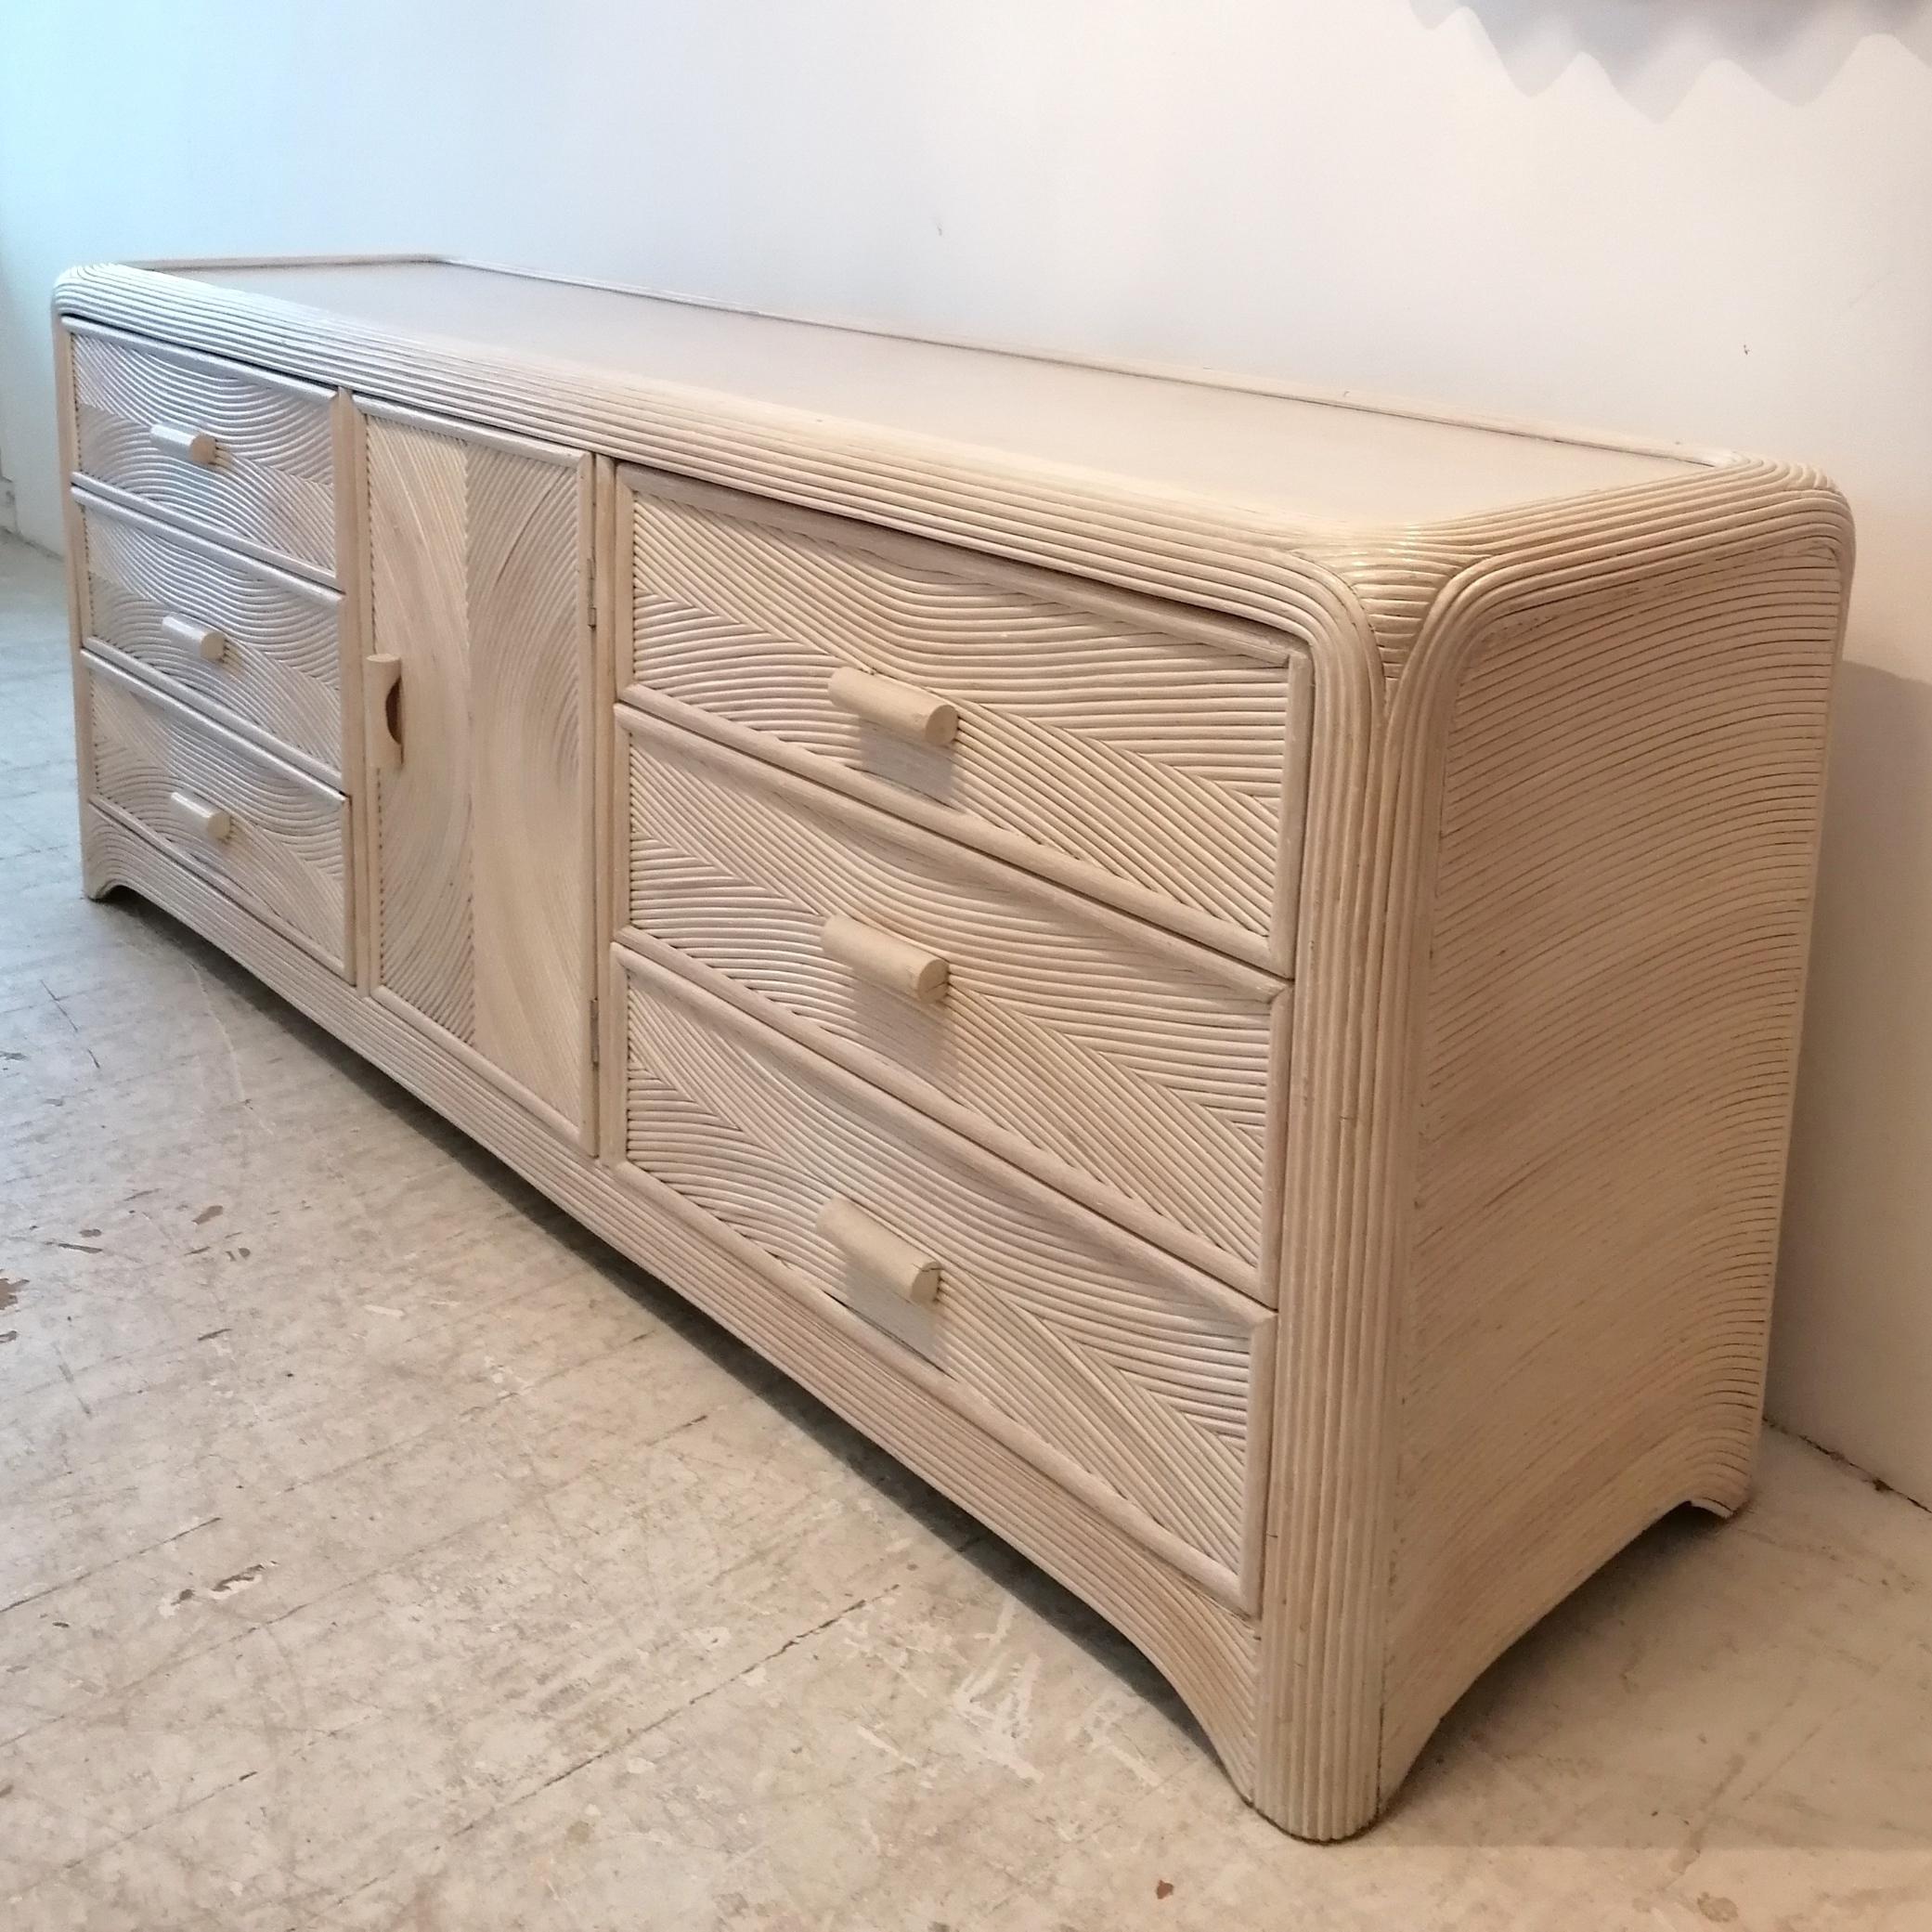 A vintage American pencil reed sideboard with drawers. Central cabinet door reveals 3 more internal drawers.
Blonde wood top, wood-lined drawers.

Dimensions: width 188cm, depth 50cm, height 75cm
